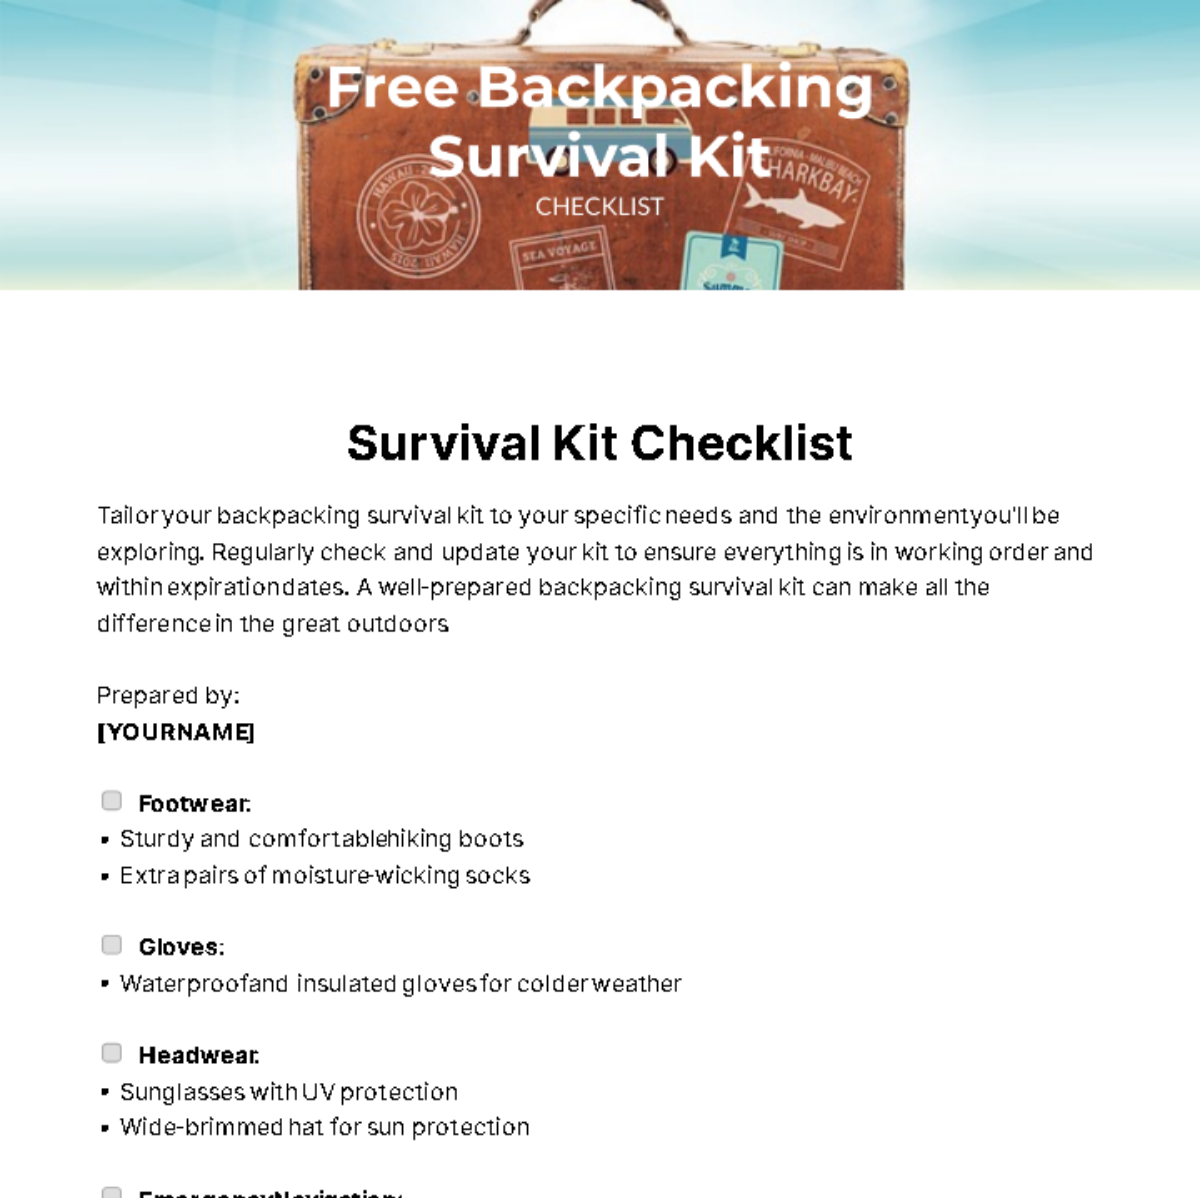 Free Backpacking Survival Kit Checklist Template